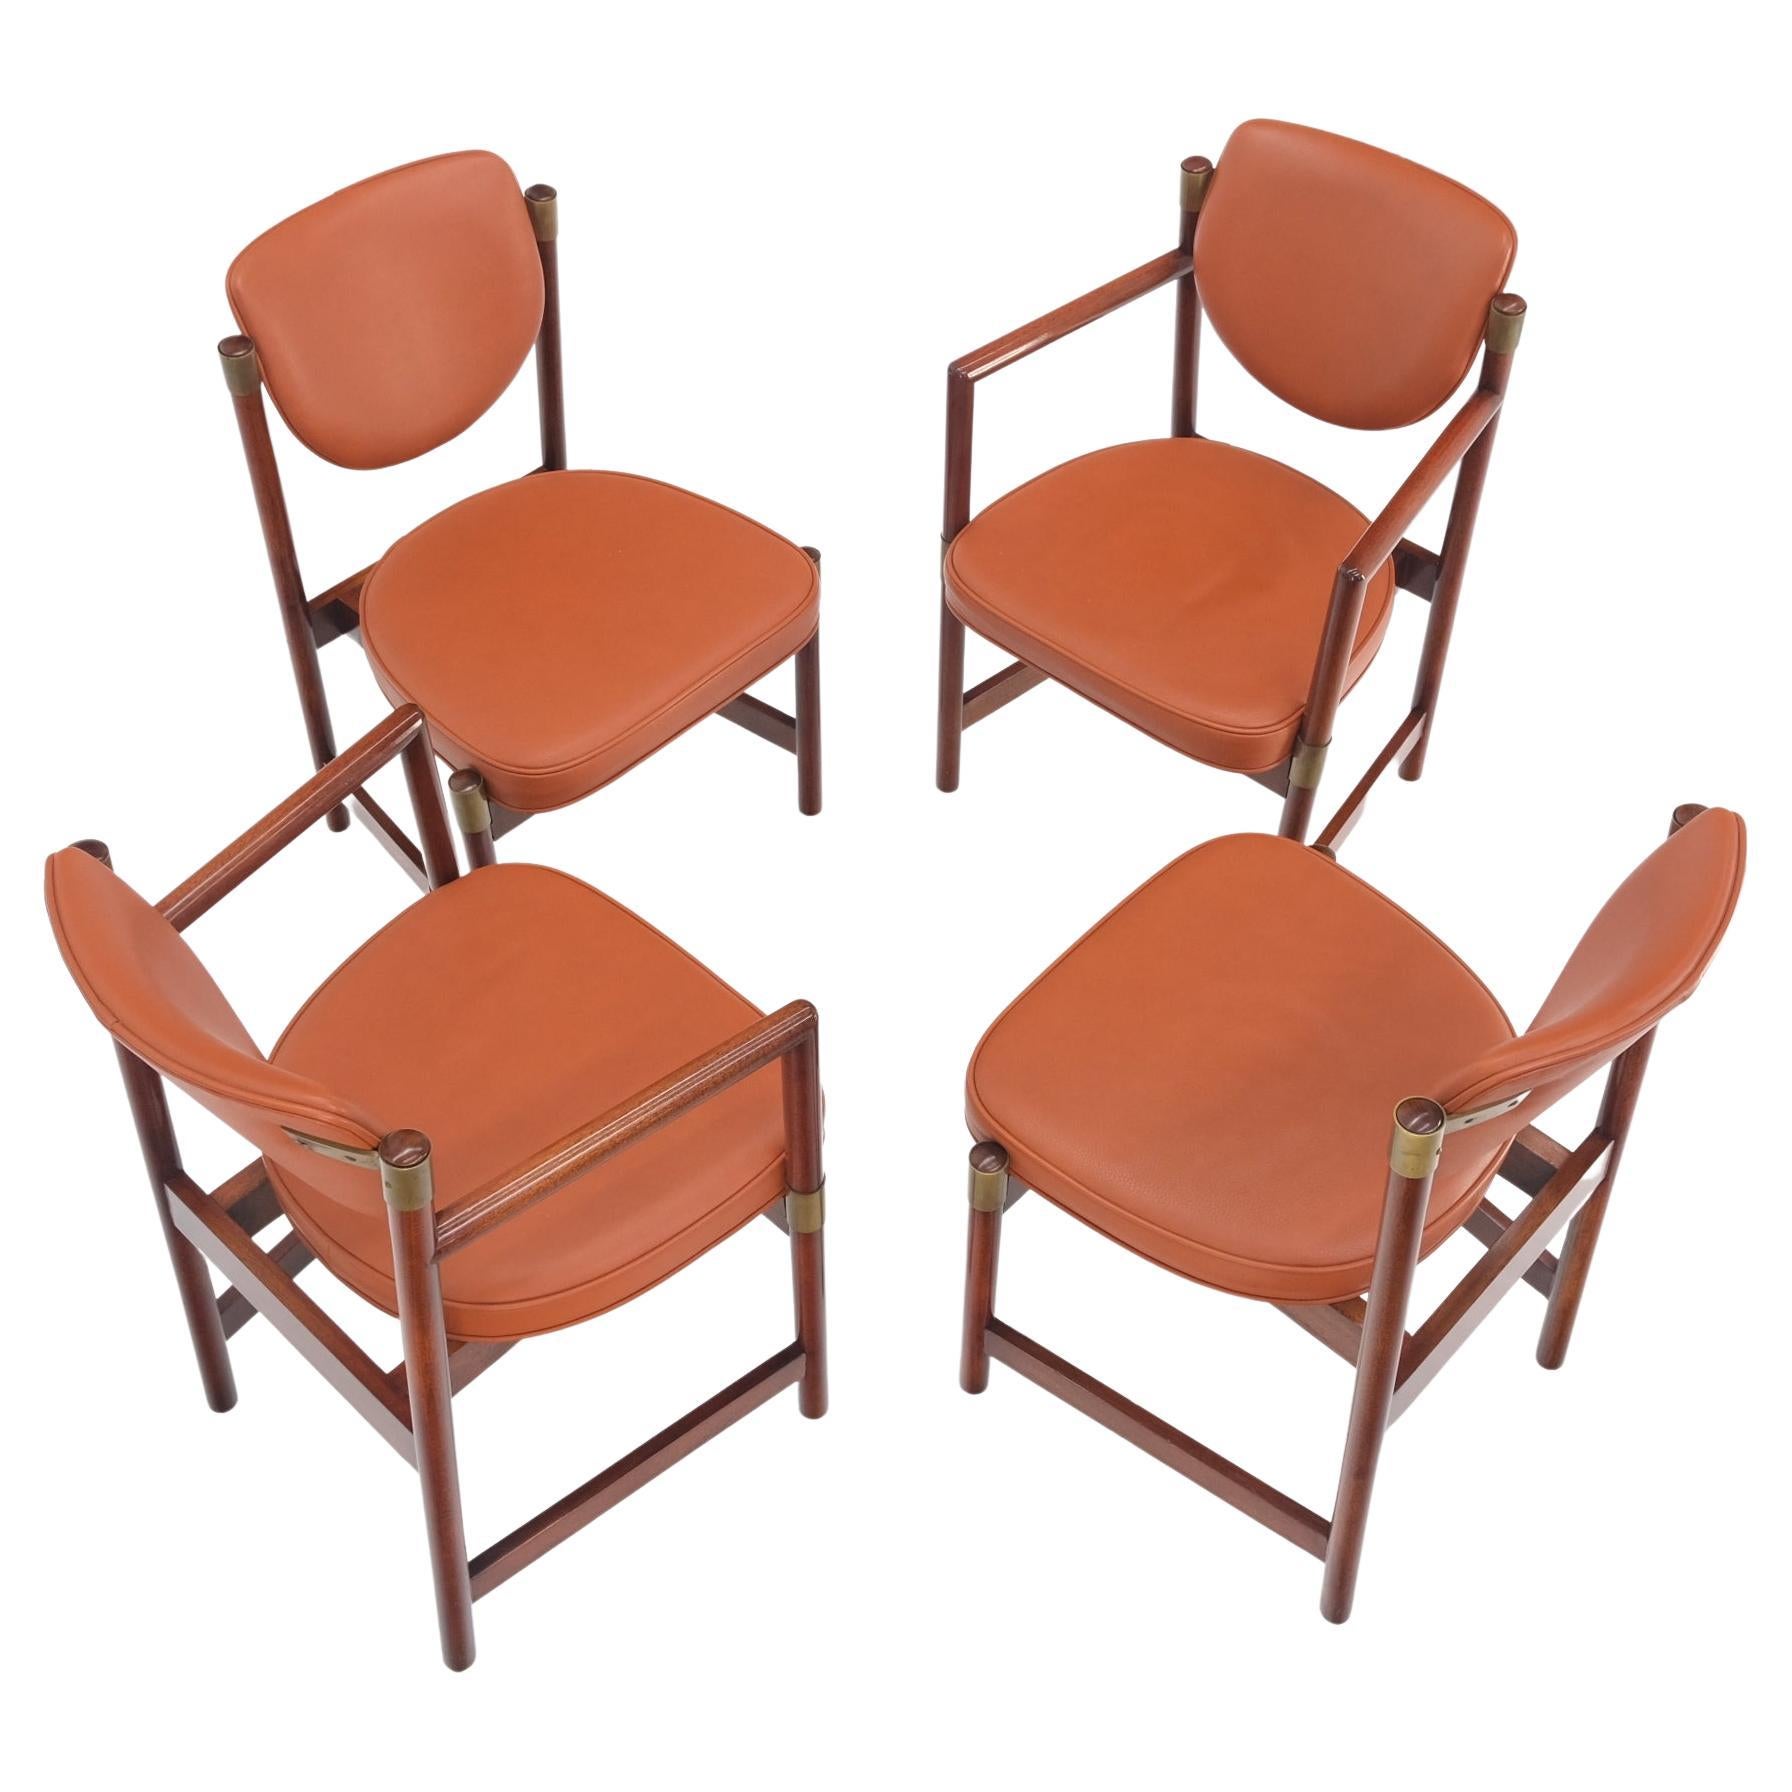 Set 4 Grossfeld House Brick leather Upholstery Brass Accents dining chairs.
Nice match for a game table set.